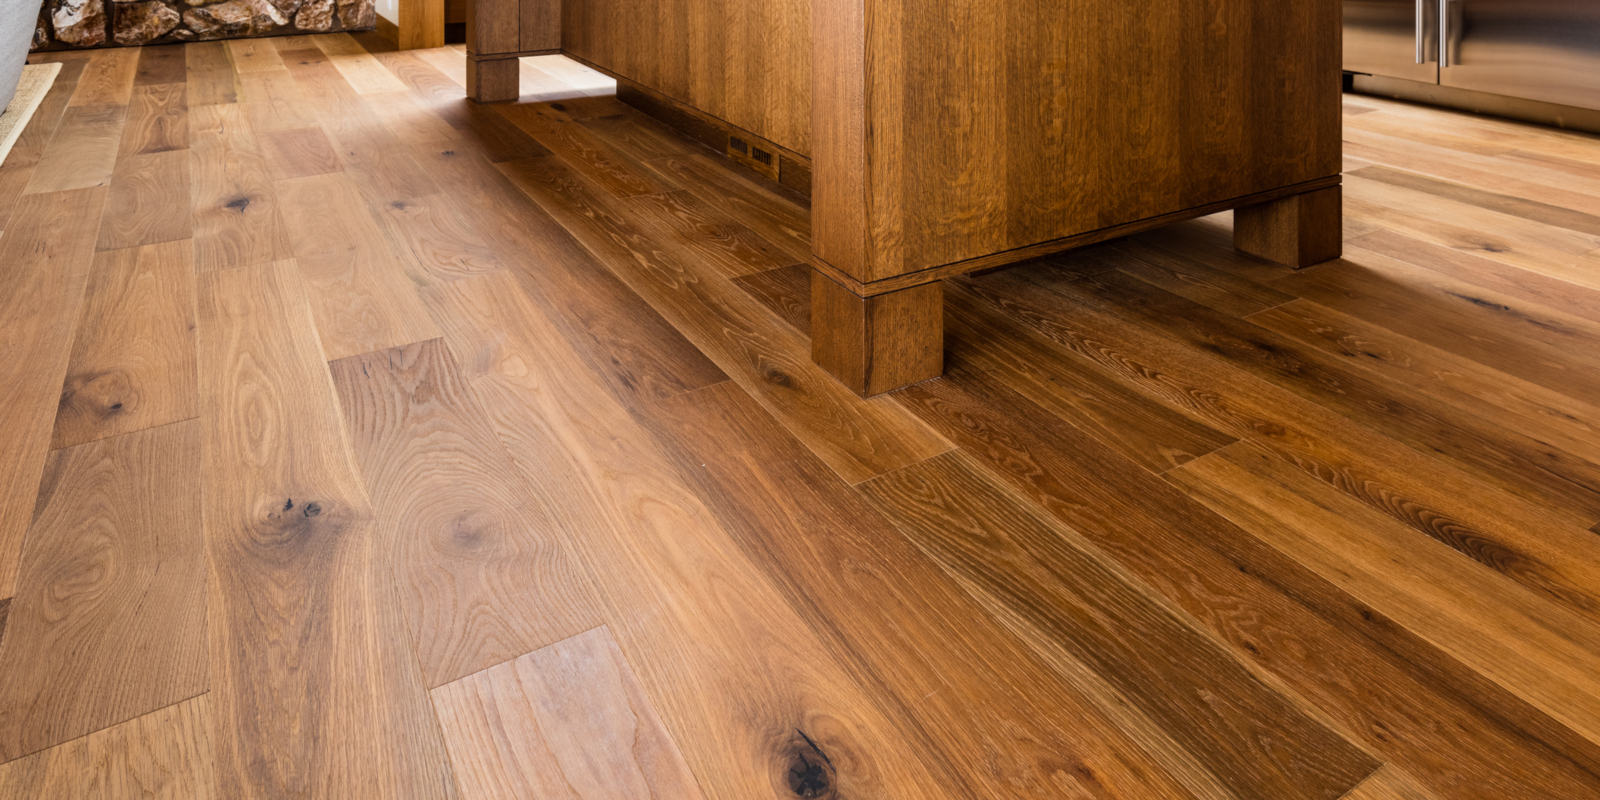 We want your hardwood flooring to be the focal point of each room in your home